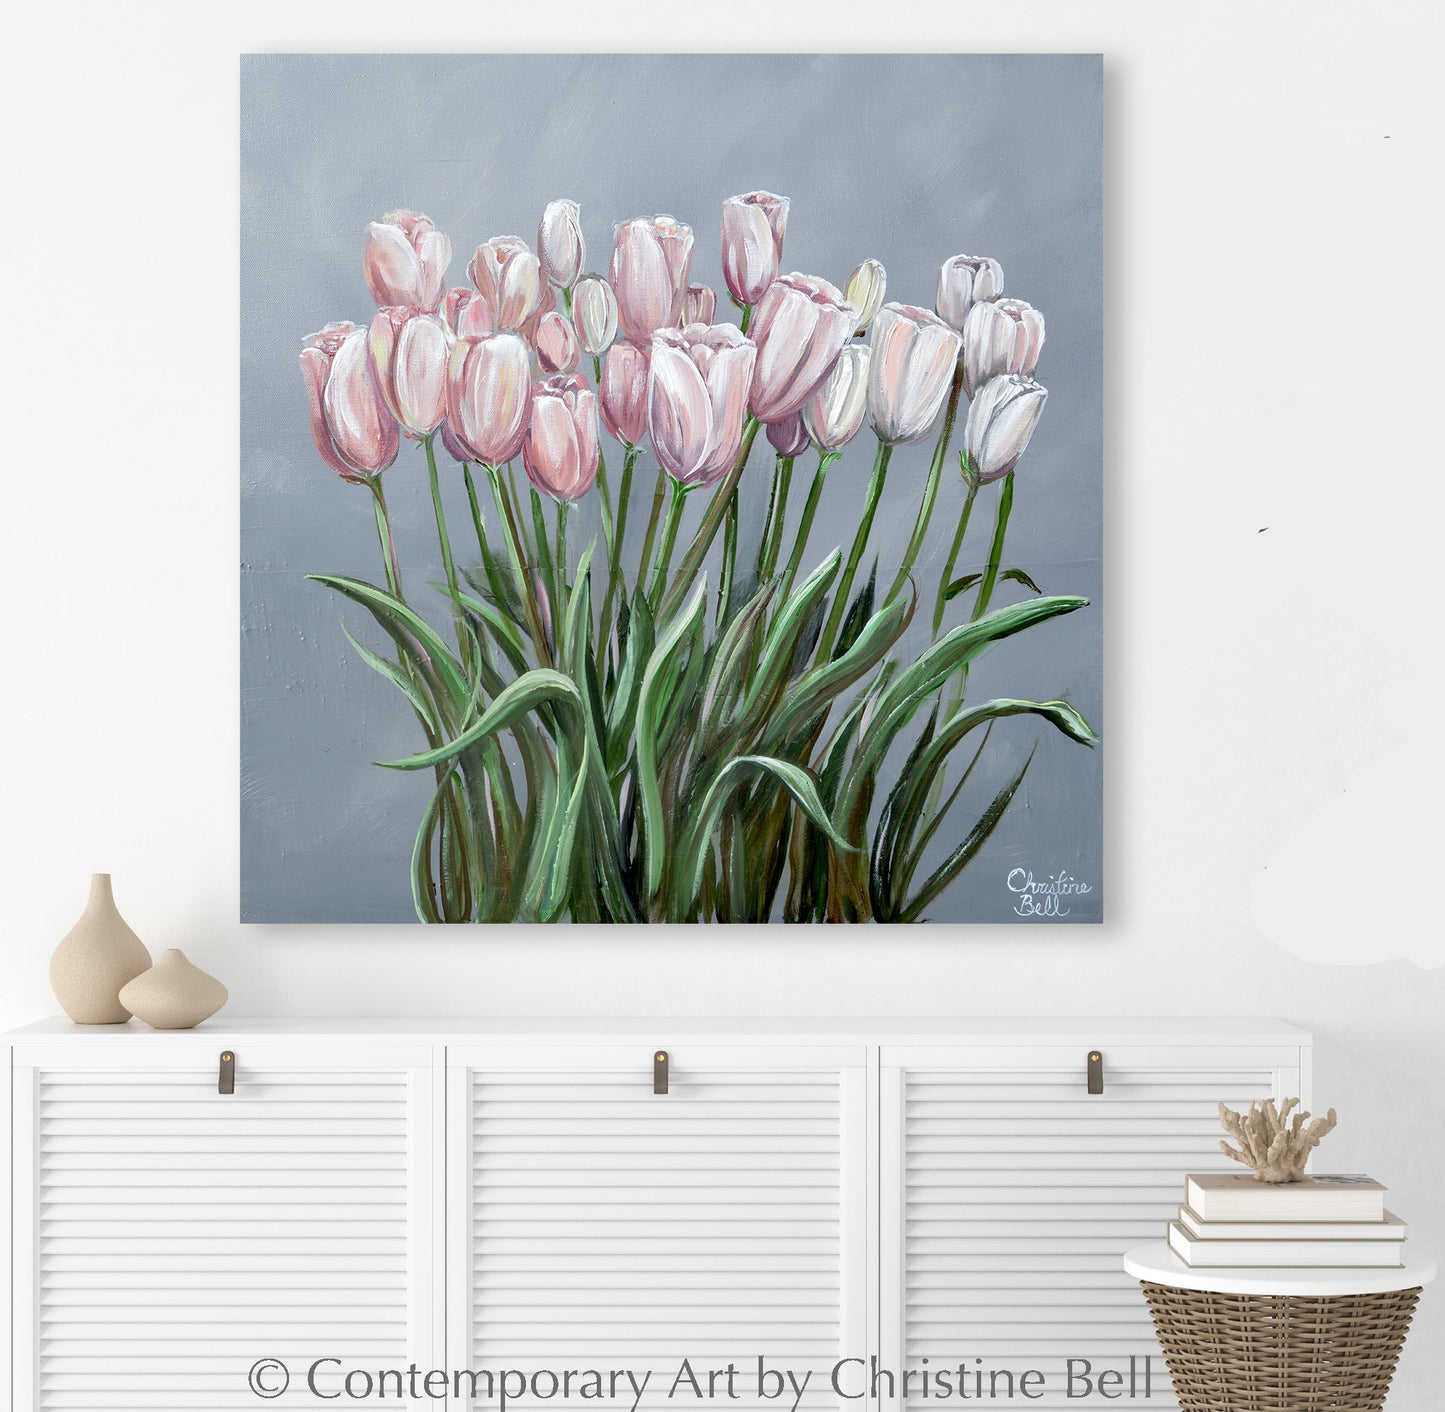 Tip Toe Through the Tulips" ORIGINAL FLORAL OIL PAINTING, Pink White Tulip Flowers